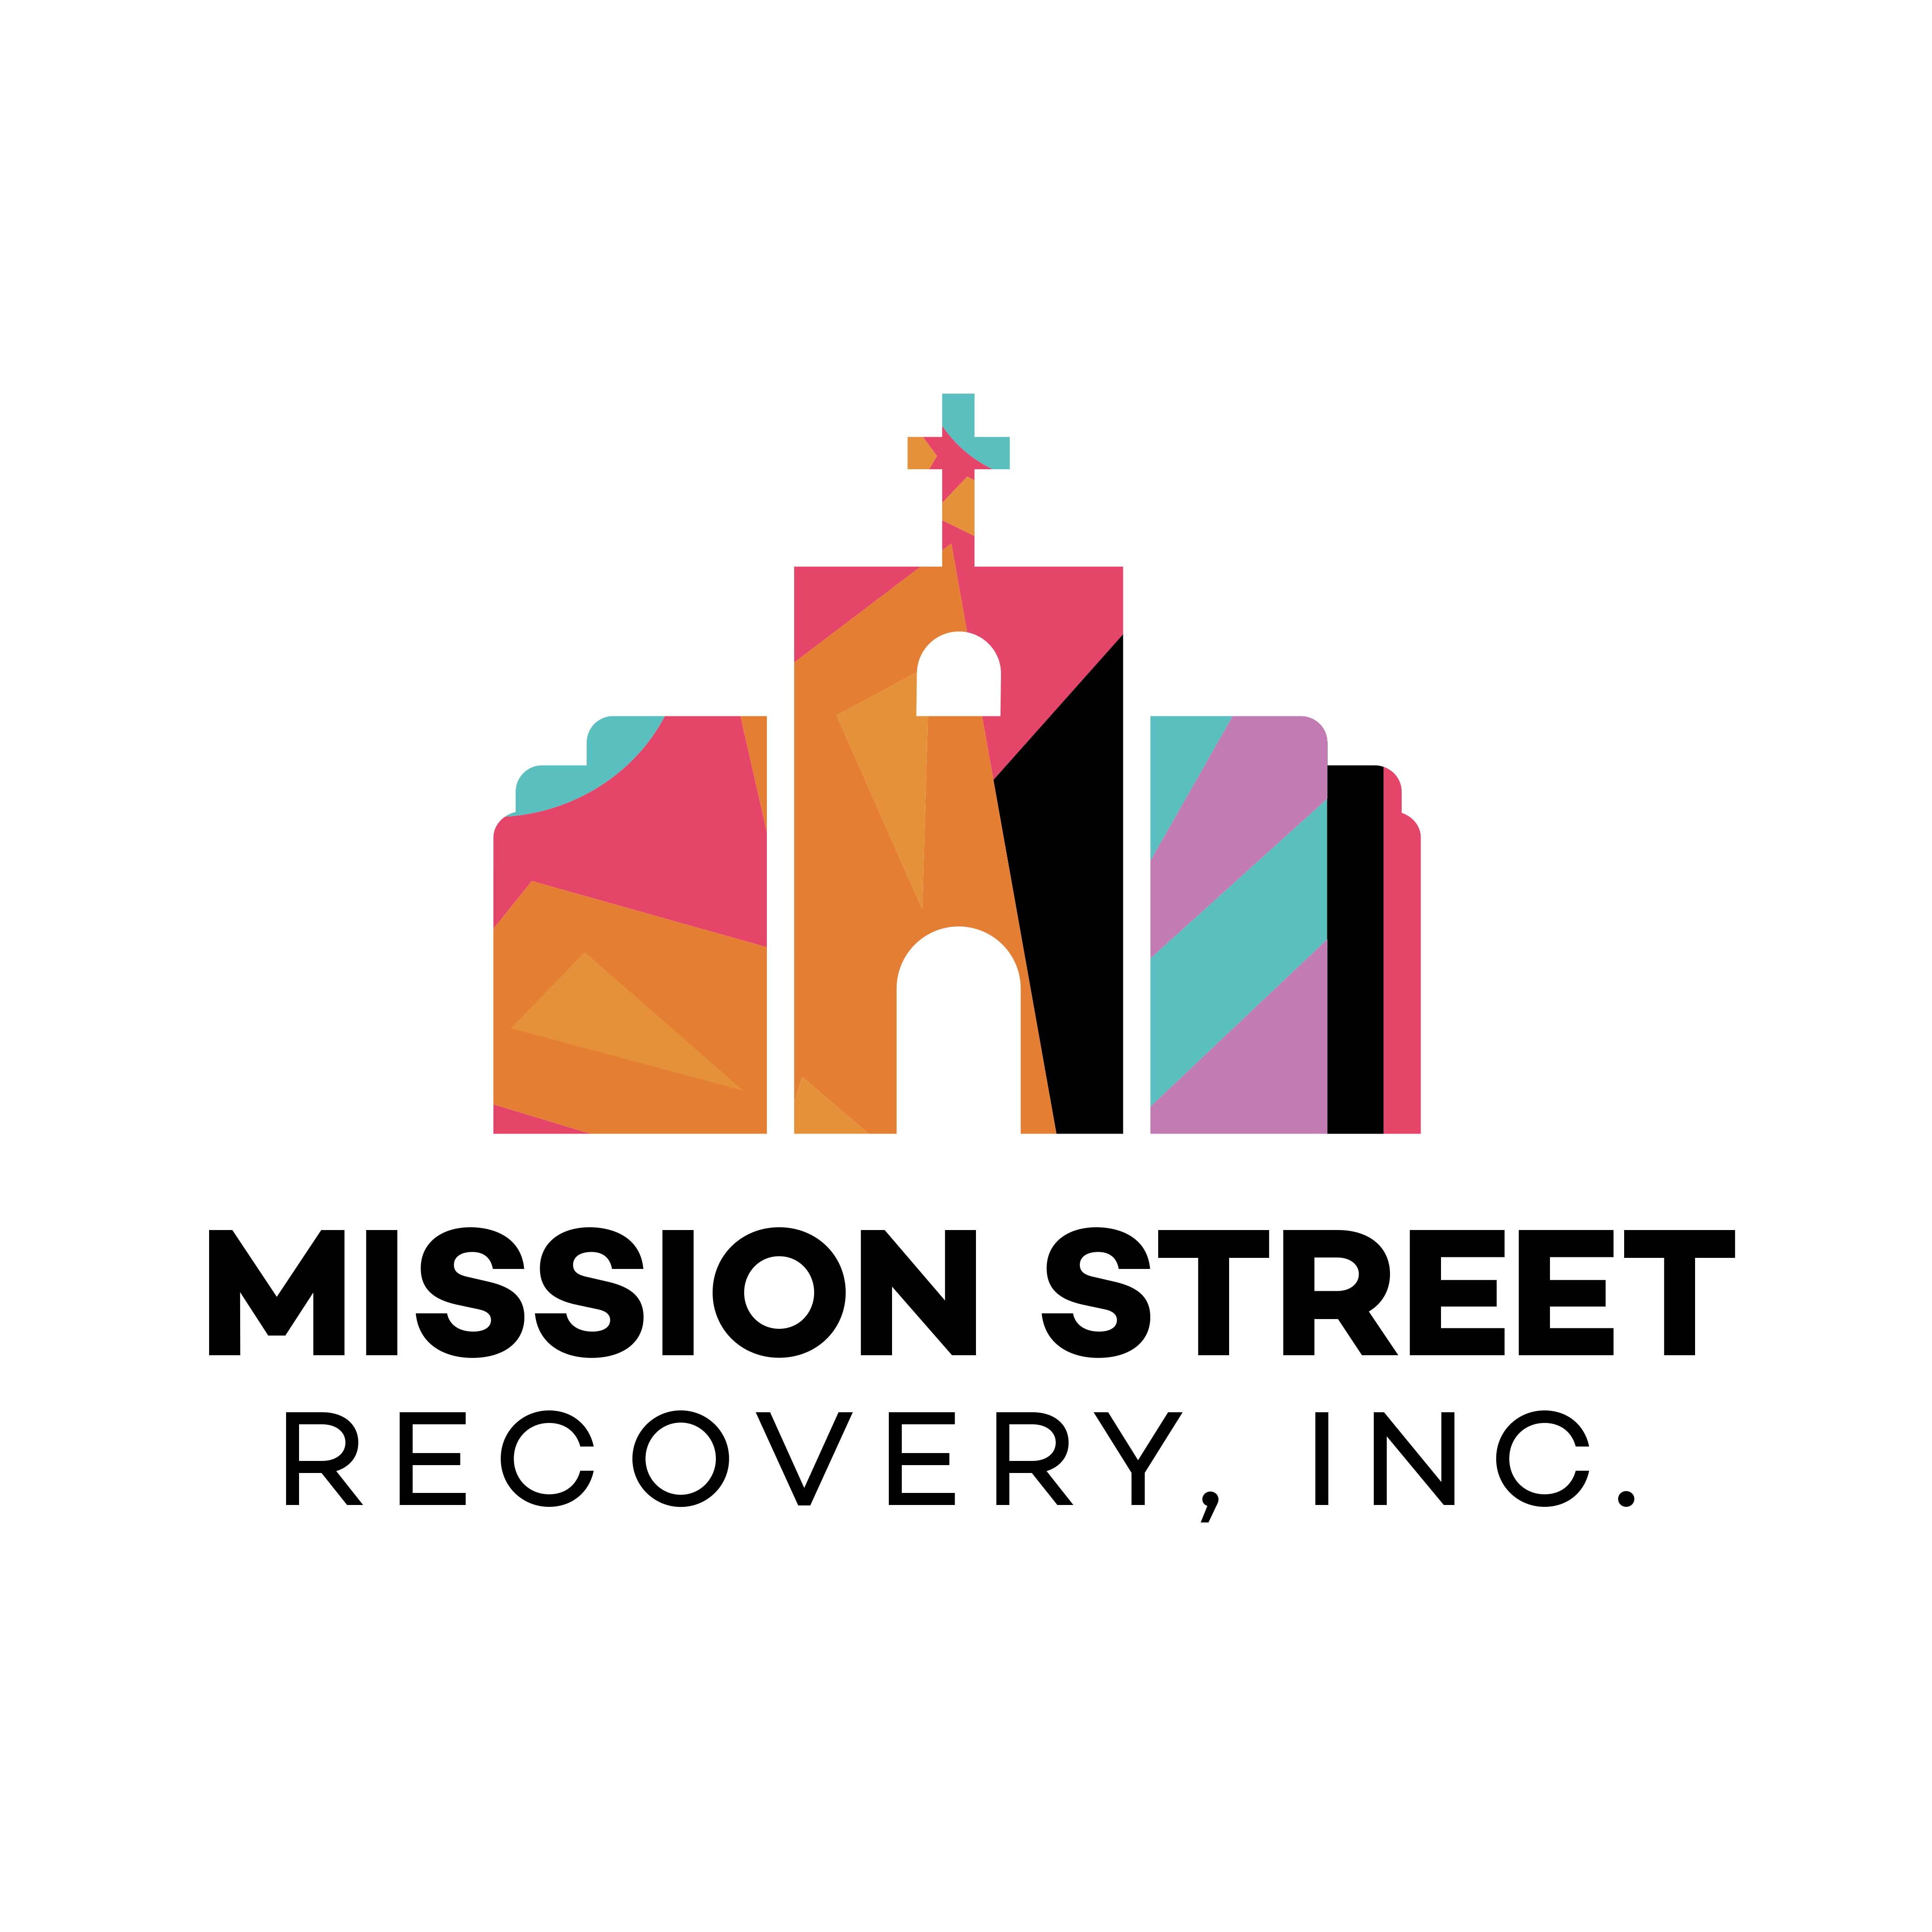 Recovery Logo - Mission Street Recovery, Inc. Logo + Branding - Galloway Creative